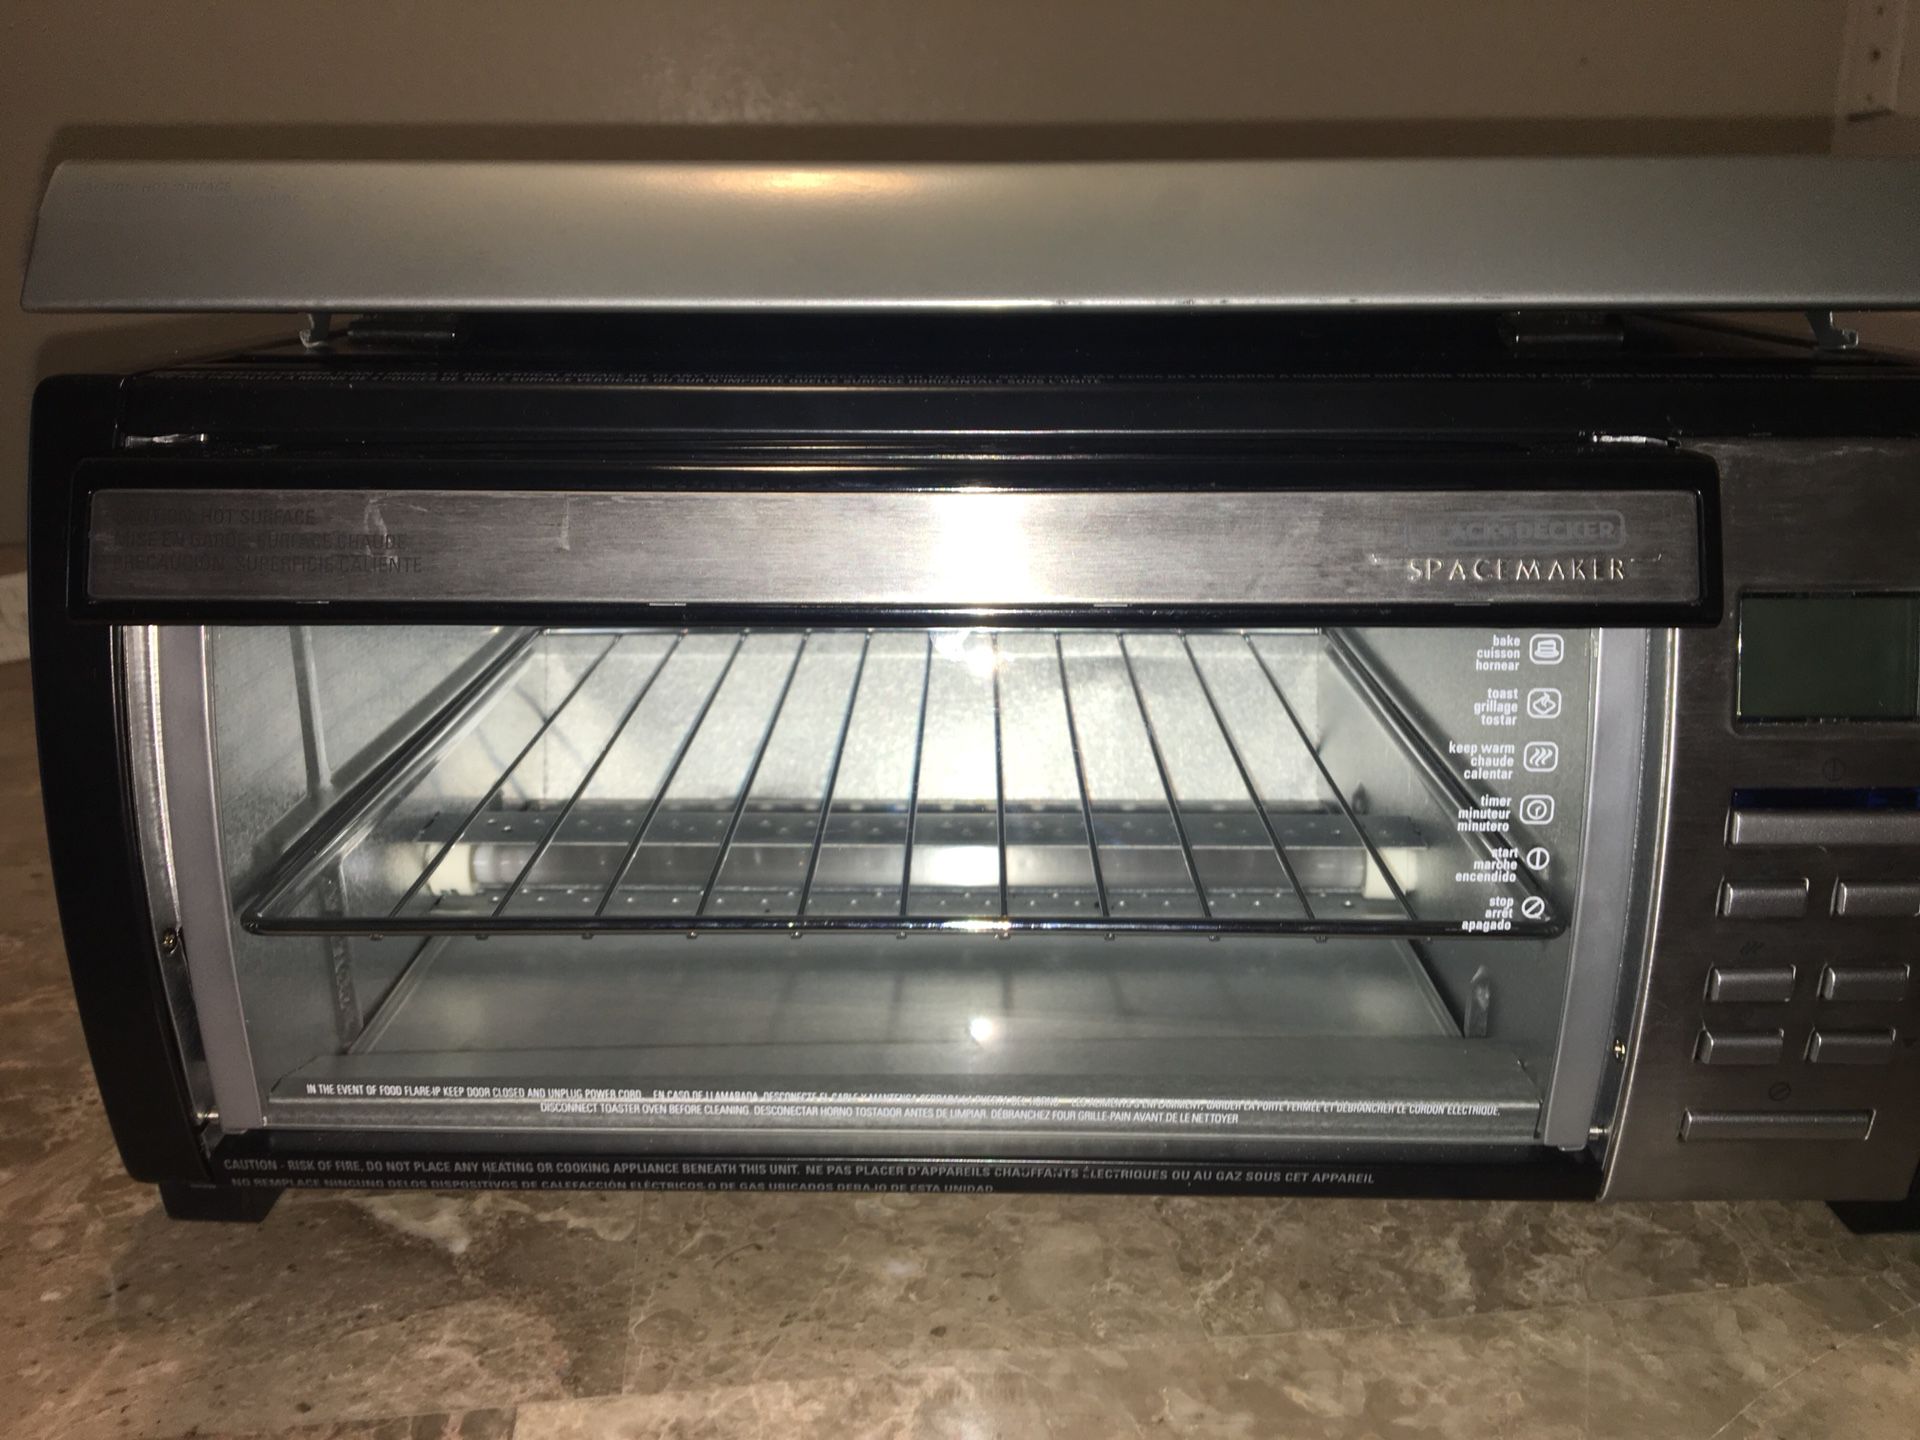 Black and Decker under-the-cabinet spacemaker toaster oven